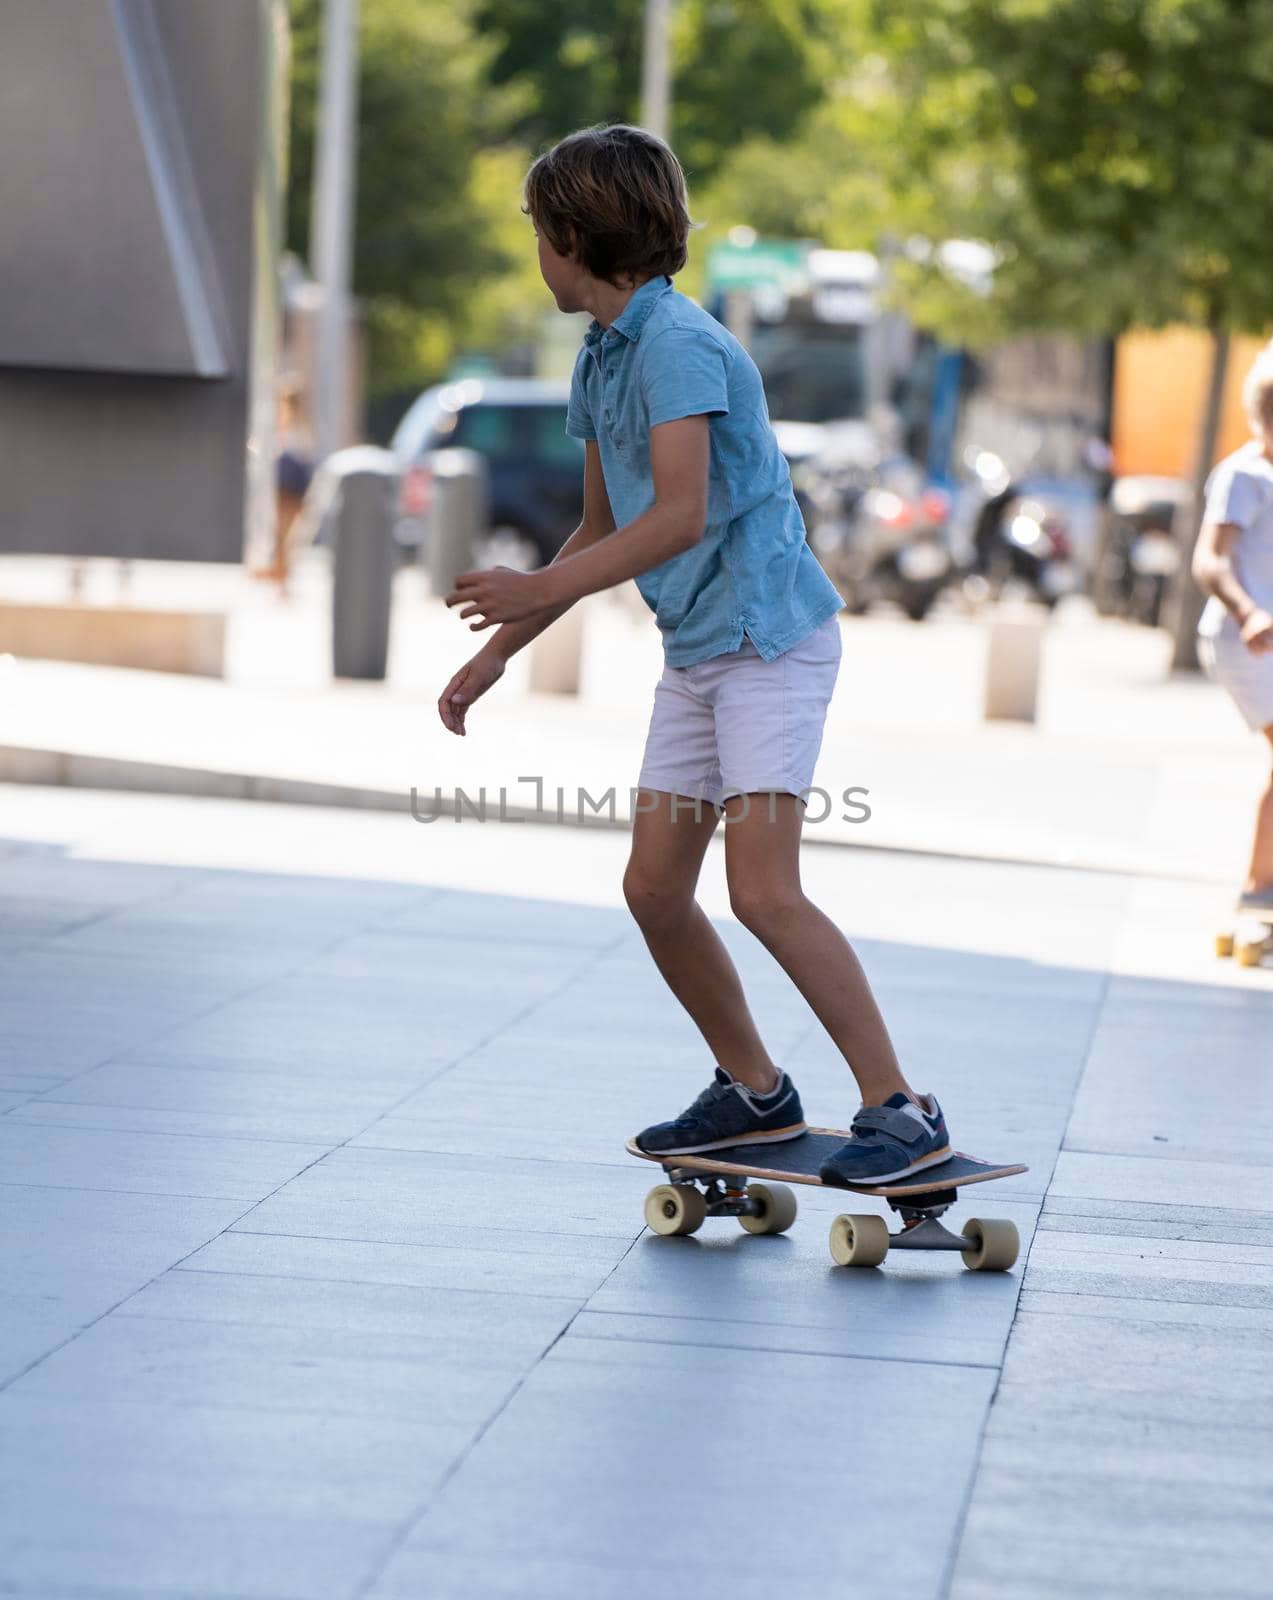 Young active elegant stylish kid balancing on a skateboard in Madrid city centre.